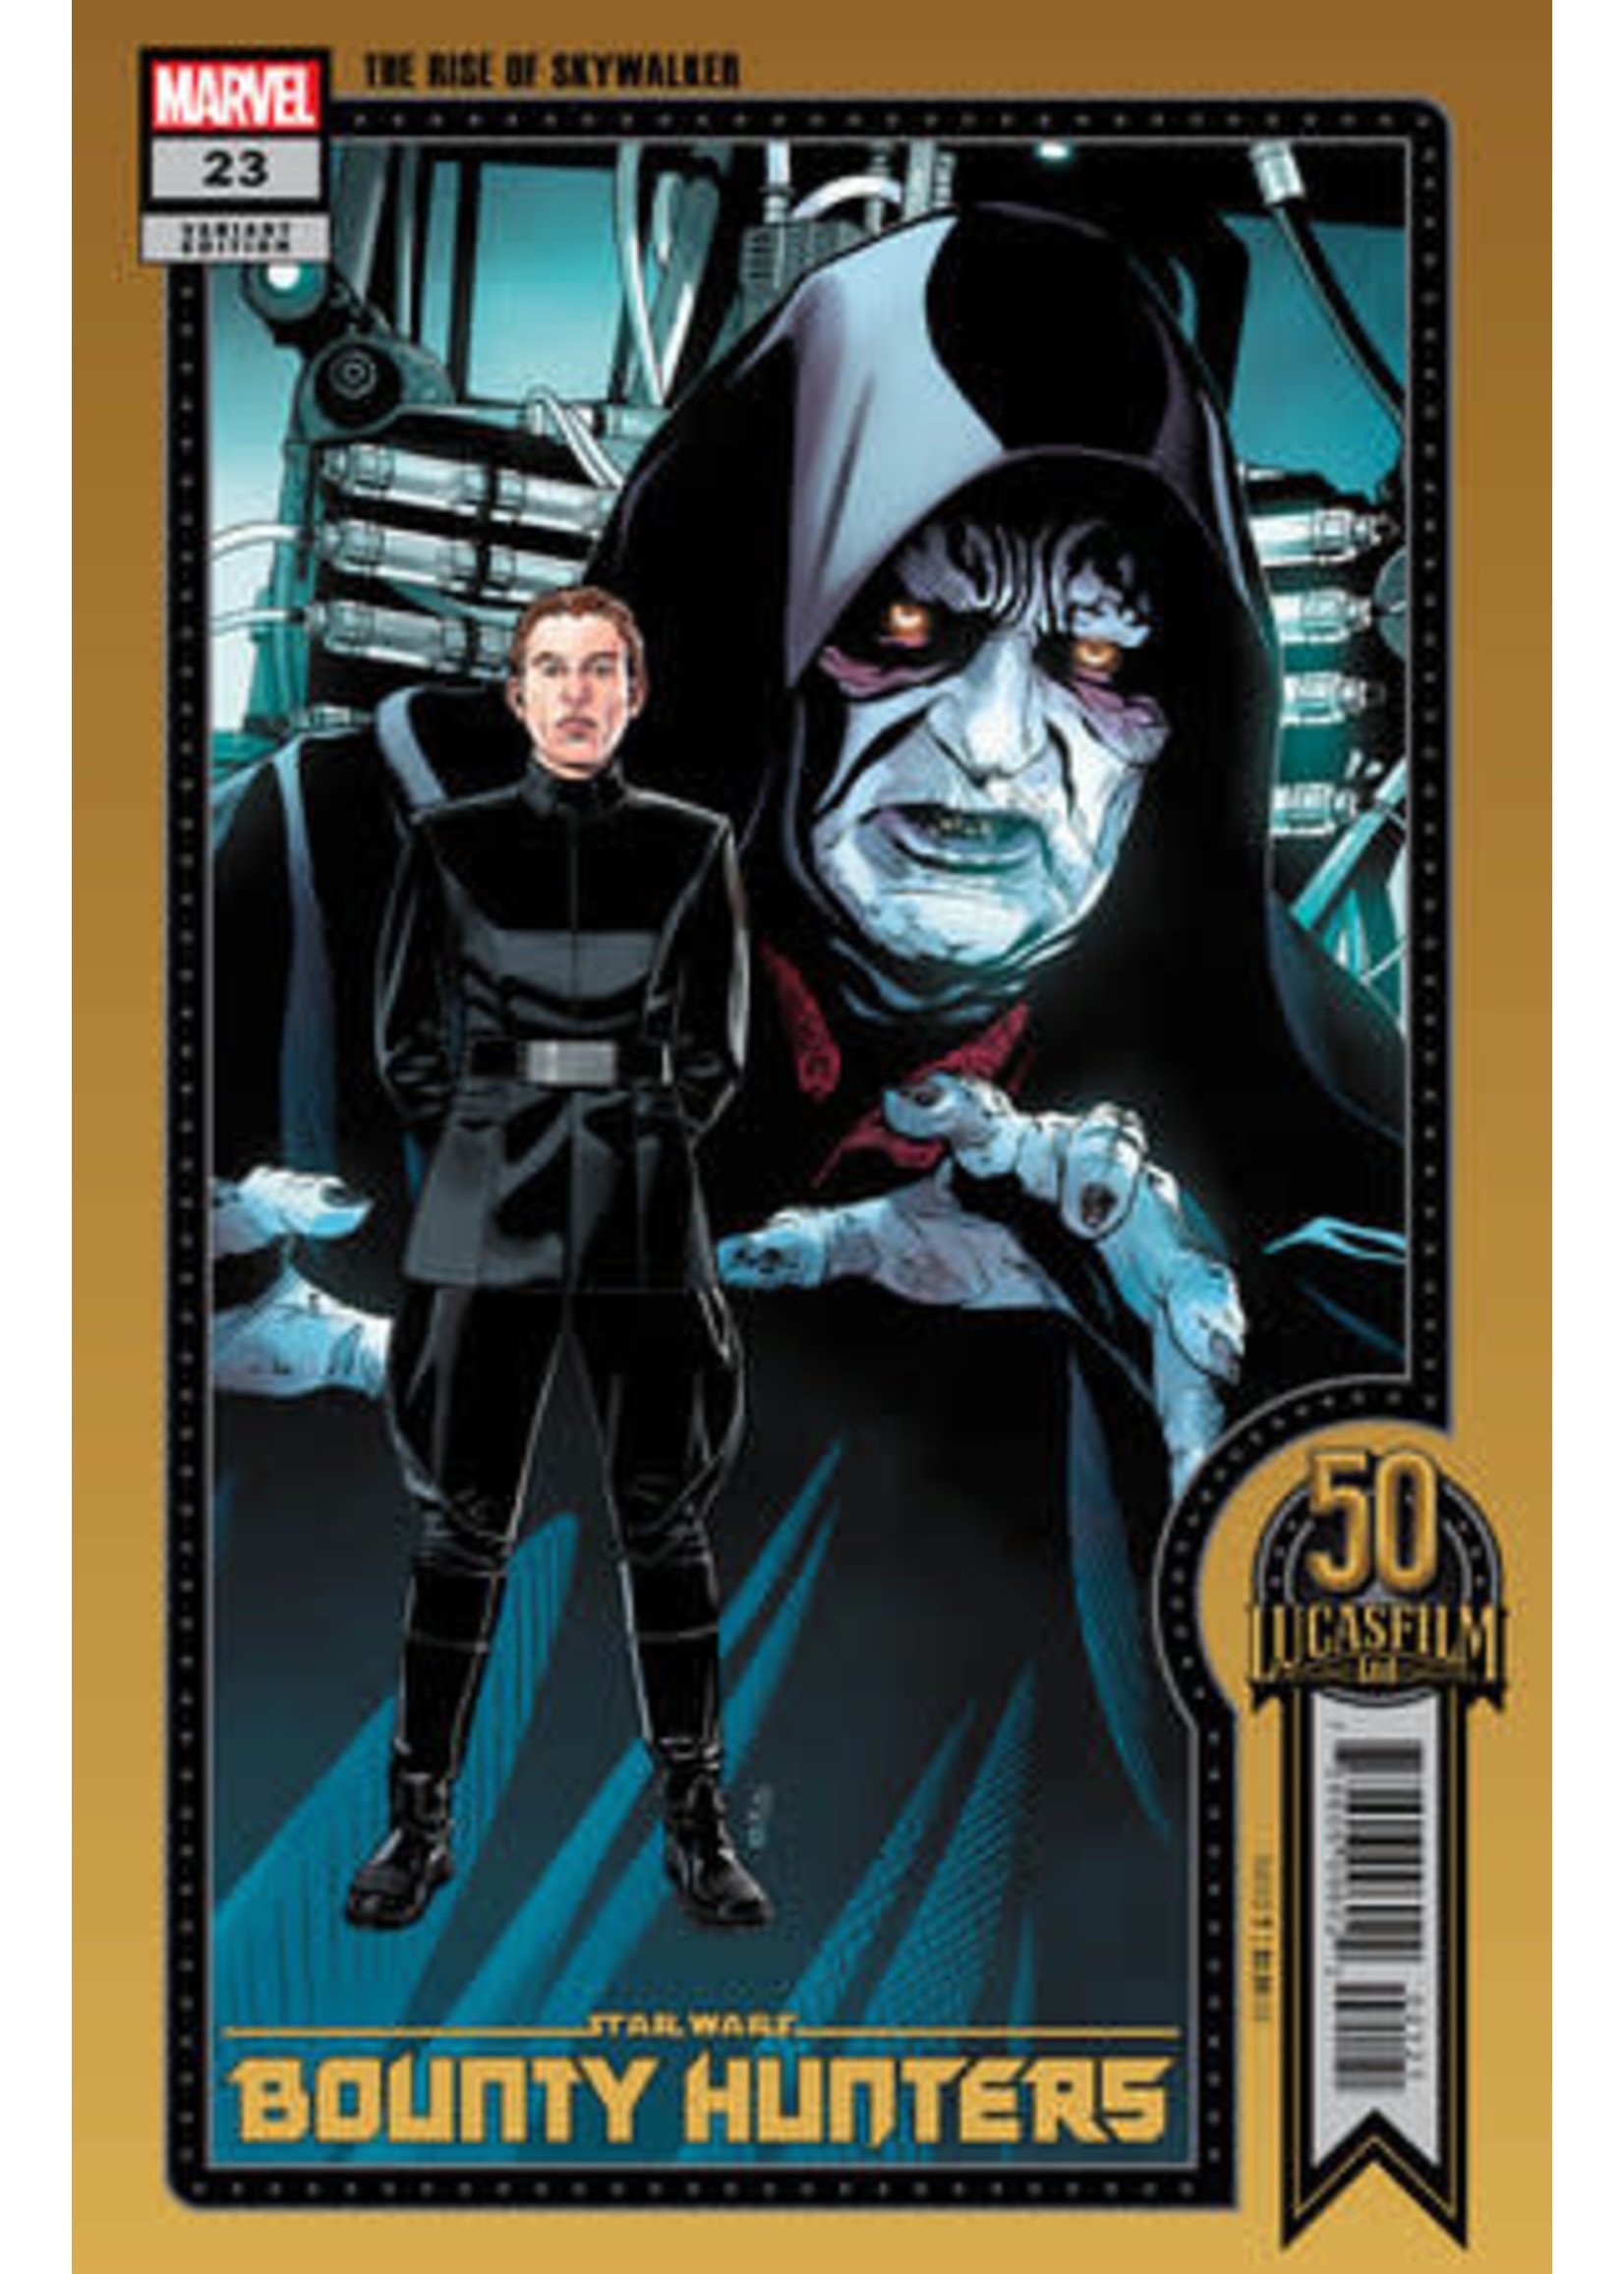 MARVEL COMICS STAR WARS BOUNTY HUNTERS #23 SPROUSE LUCASFILM 50TH ANNIVERSARY VARIANT